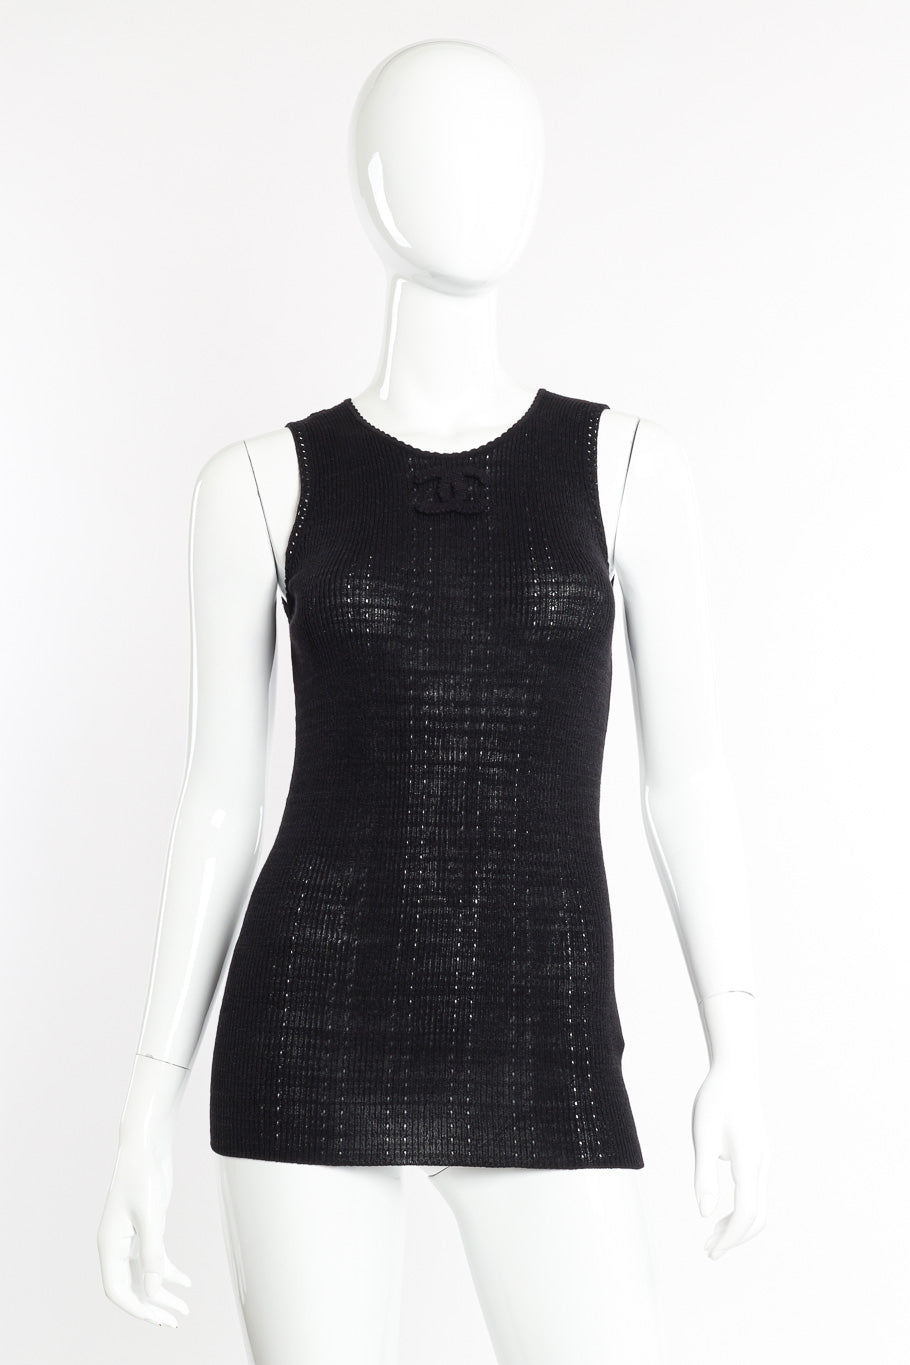 Chanel Logo Knit Tank Top front view on mannequin @Recessla